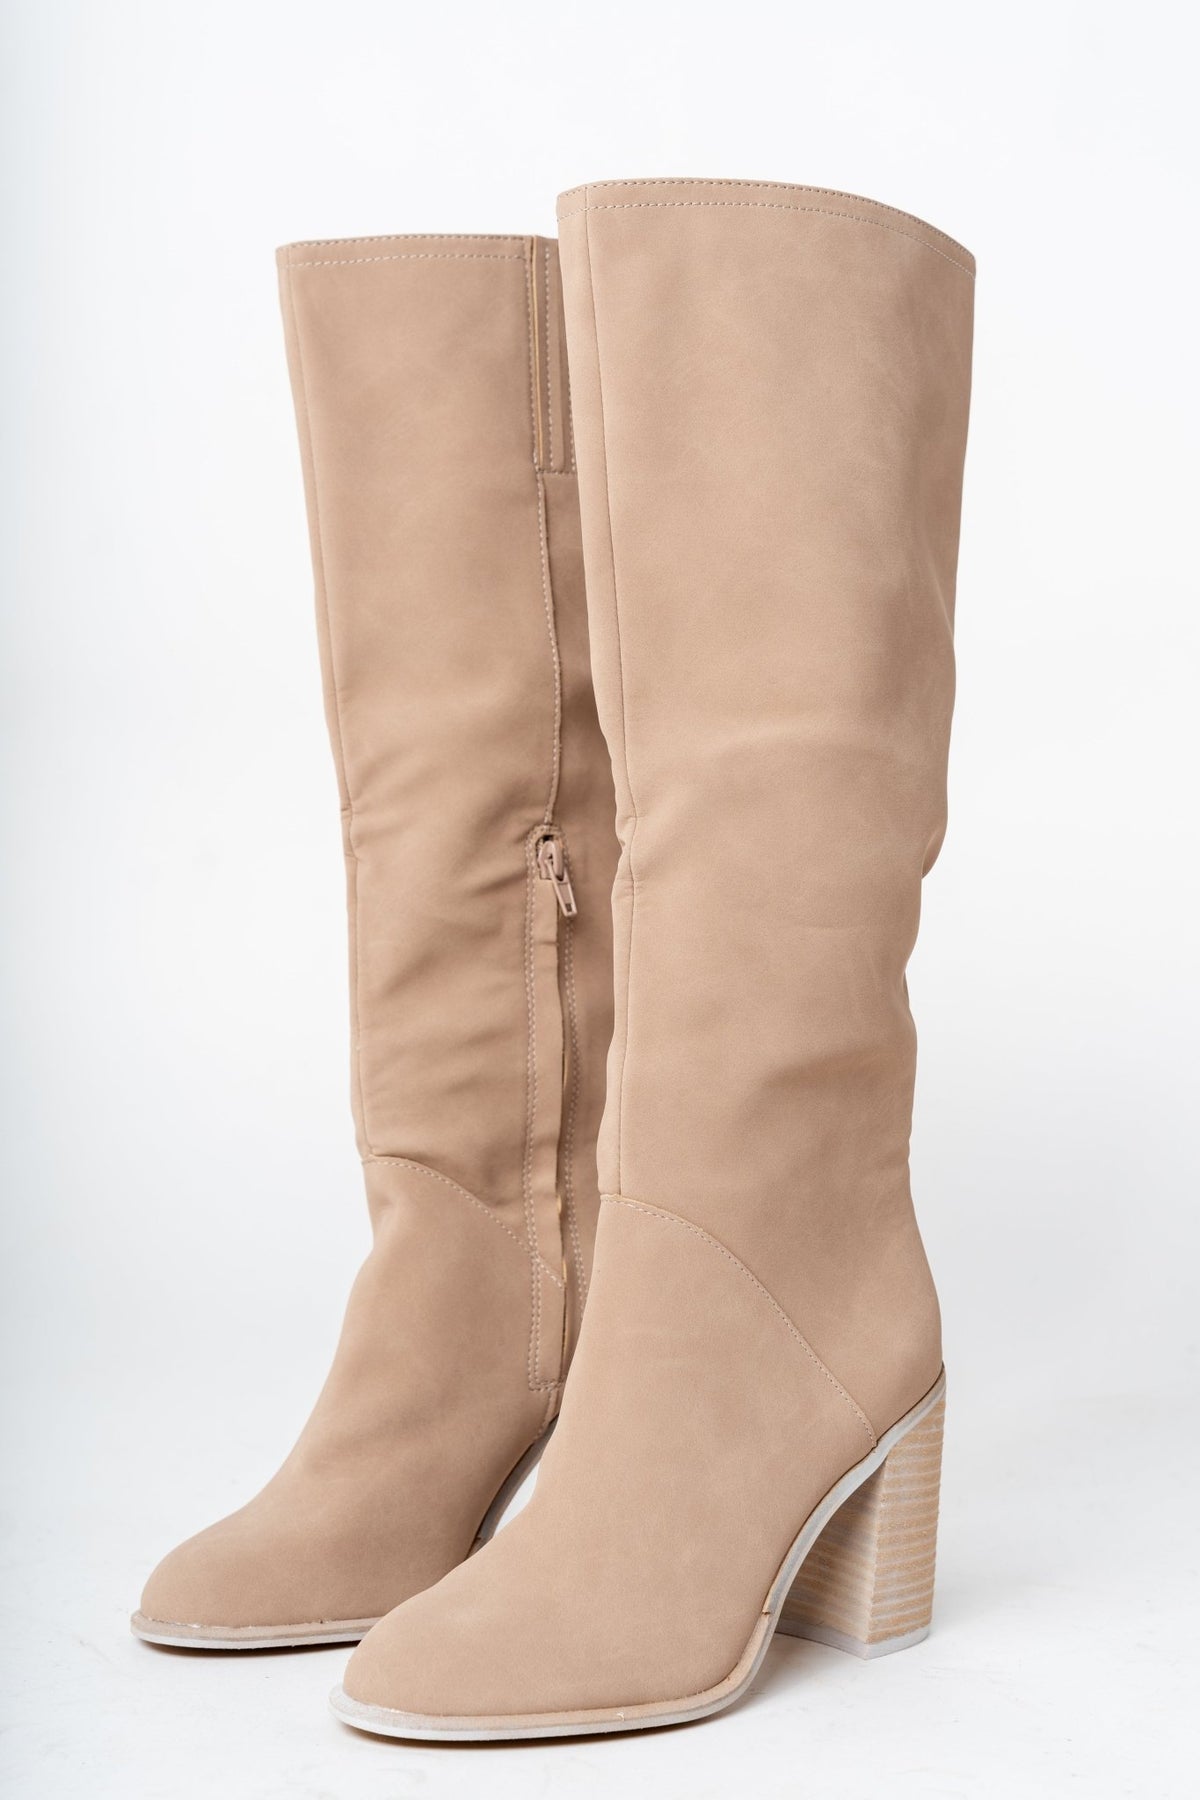 Shiloh knee high boot cedar wood - Cute shoes - Trendy Shoes at Lush Fashion Lounge Boutique in Oklahoma City